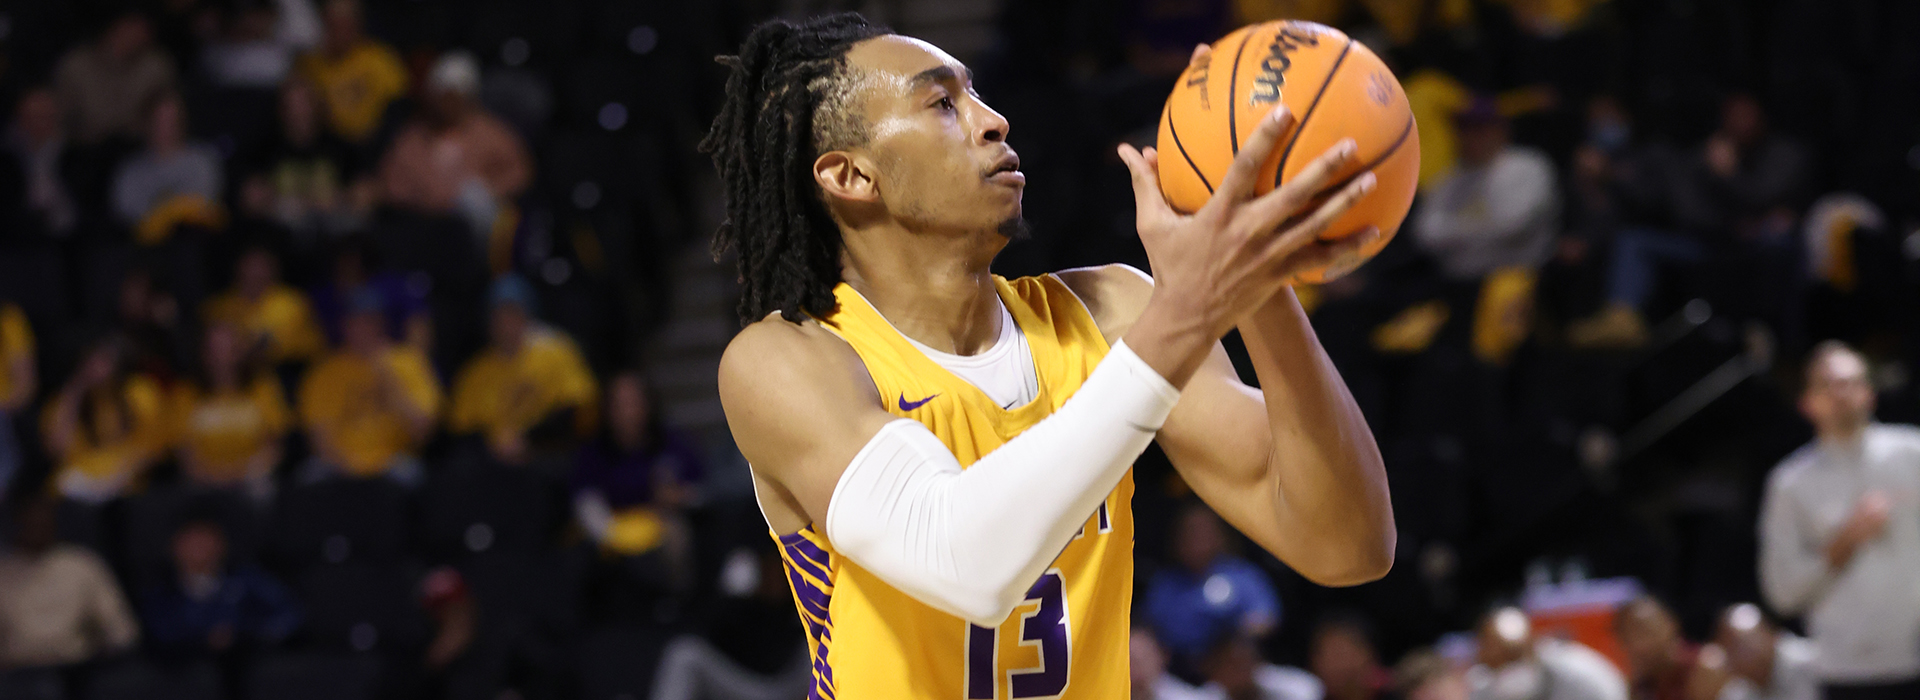 Purple and gold complete Illinois road trip with Saturday tilt at SIUE